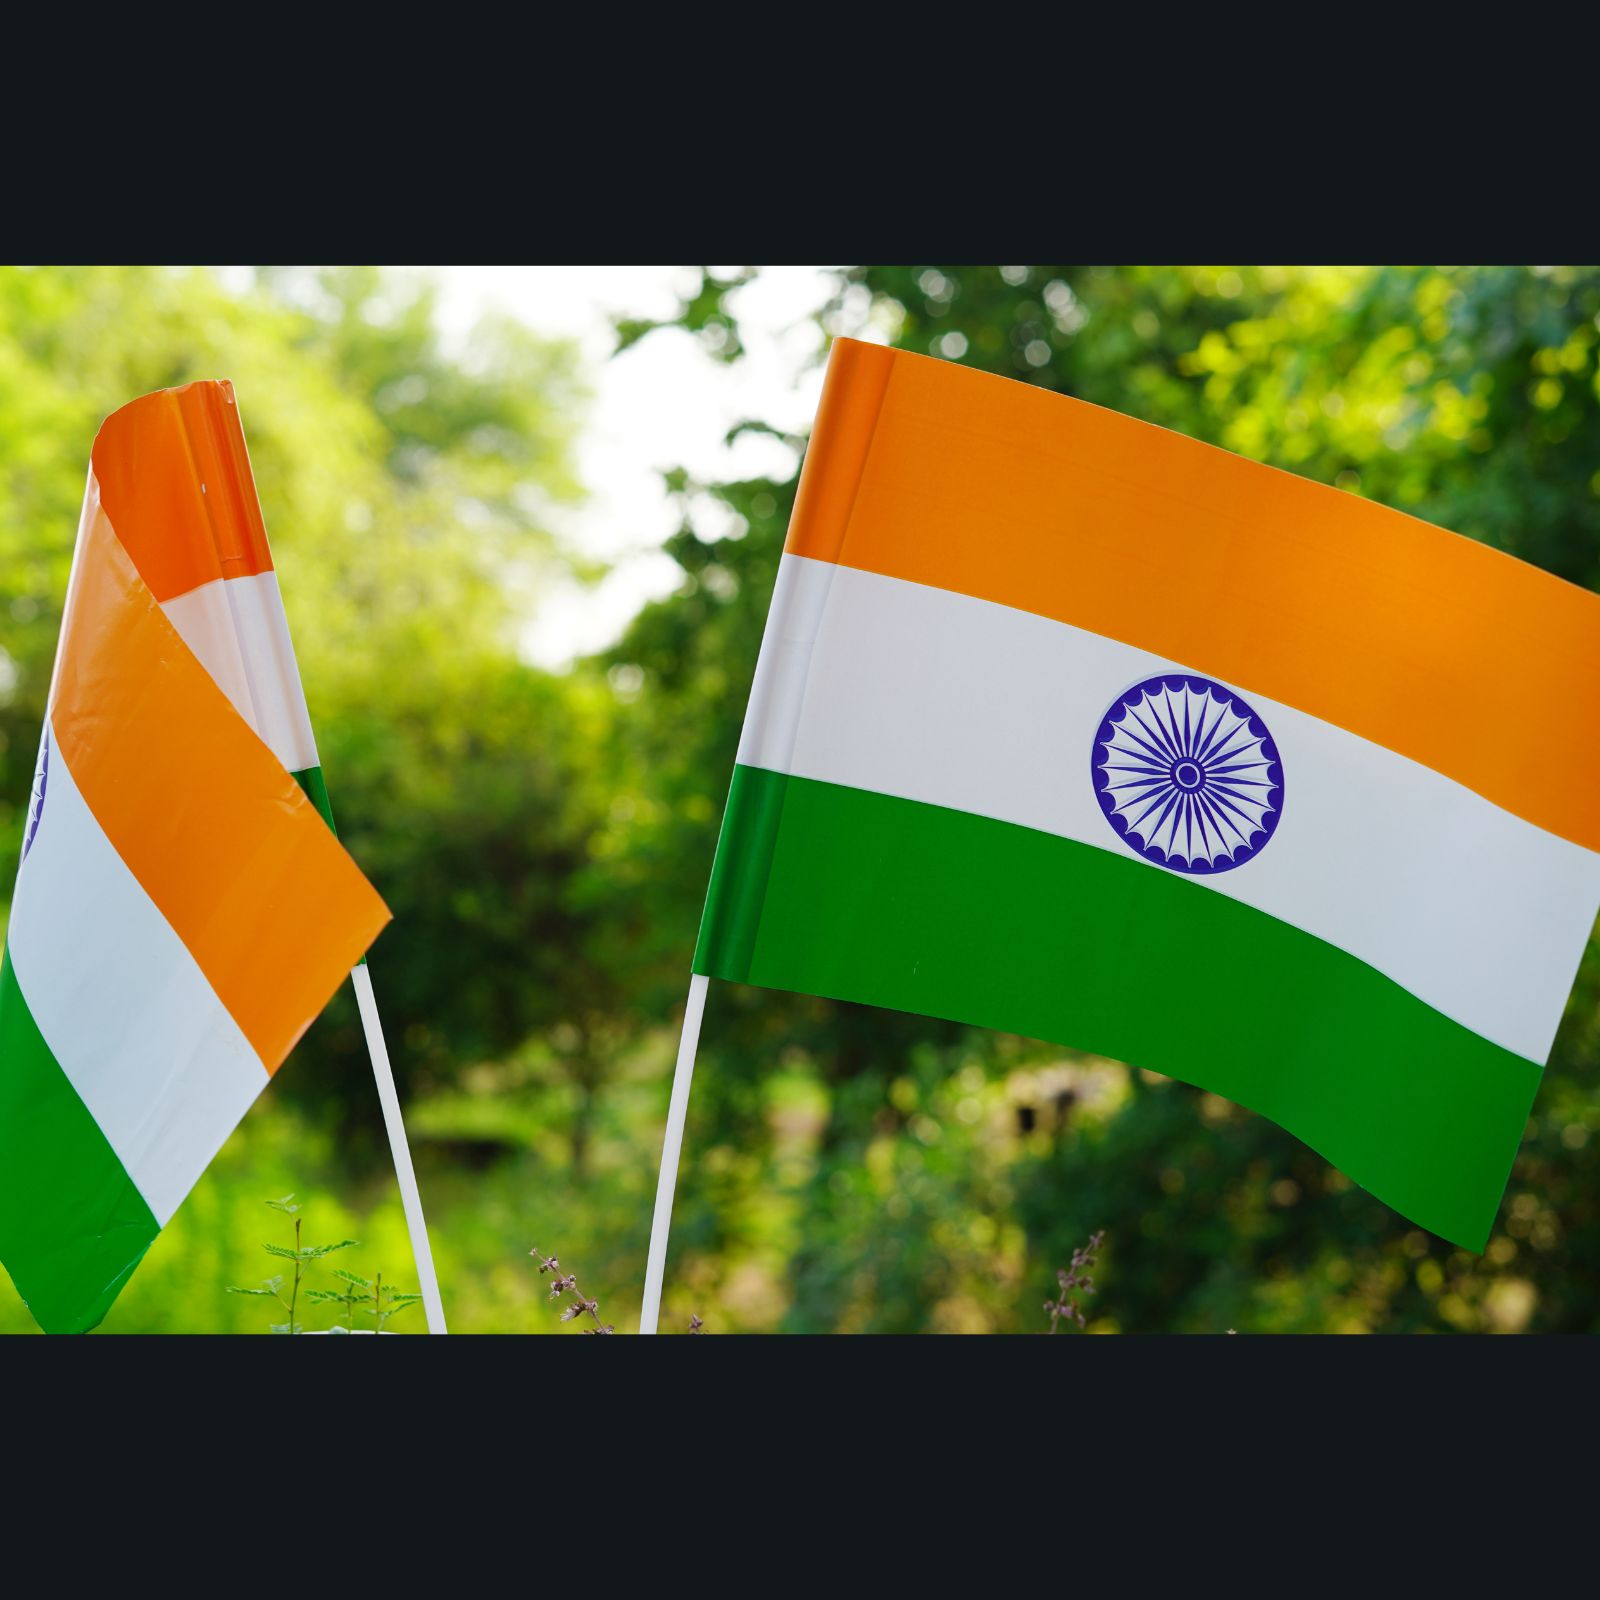 India Independance Day Vector Hd Images, Silk Frame India Independence Day  With 75th Sign, Sign, 75th, India Independence Day PNG Image For Free  Download